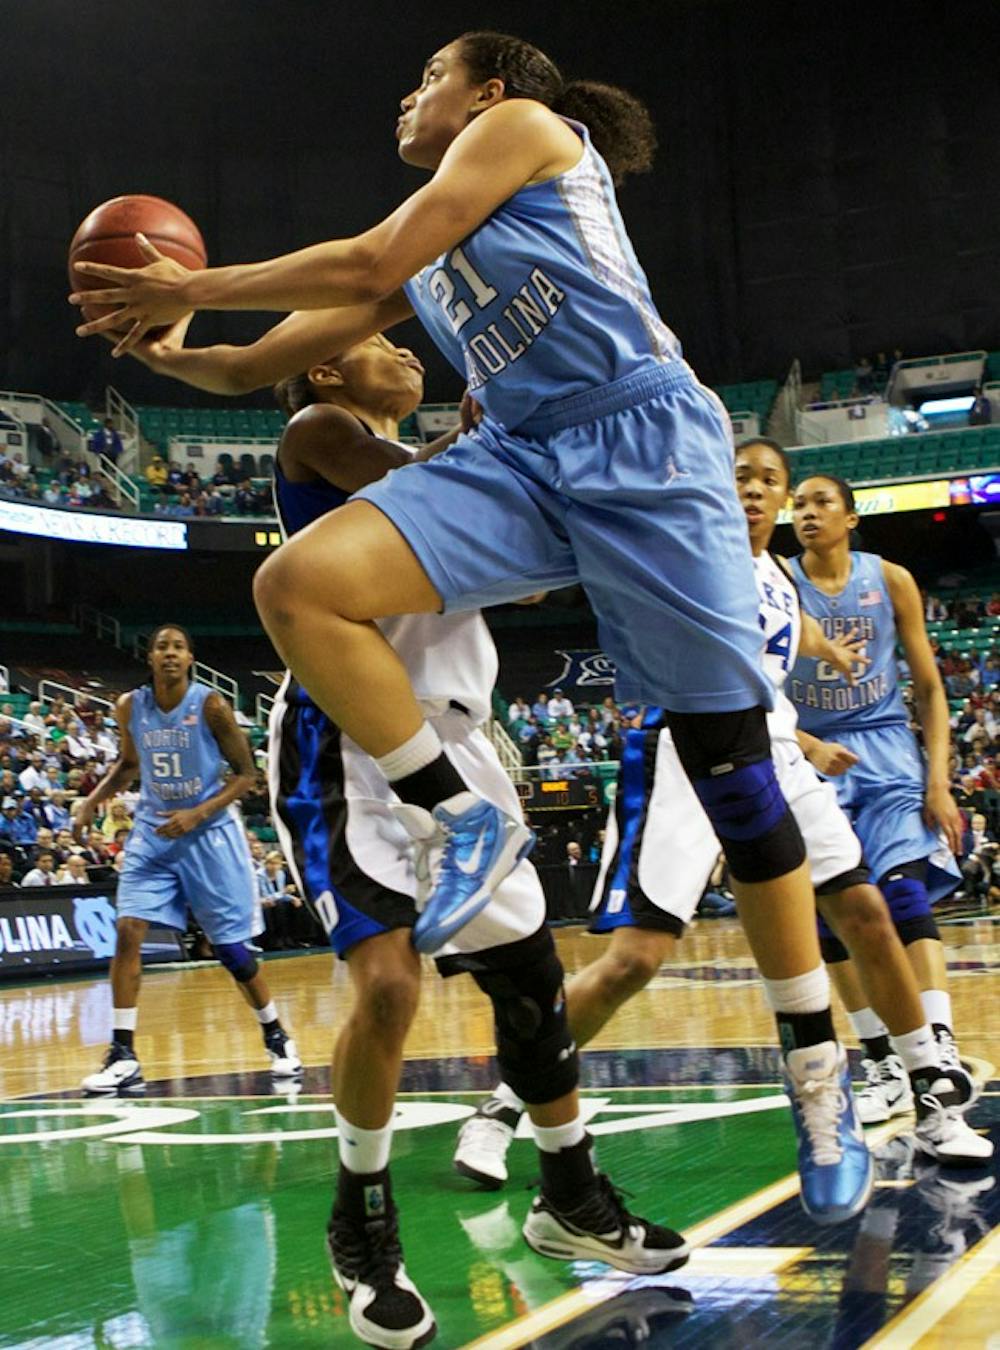 Krista Gross goes up for a shot in the first half of the ACC Tournament Championship Game. The Tar Heels fell to the Blue Devils 81-66.